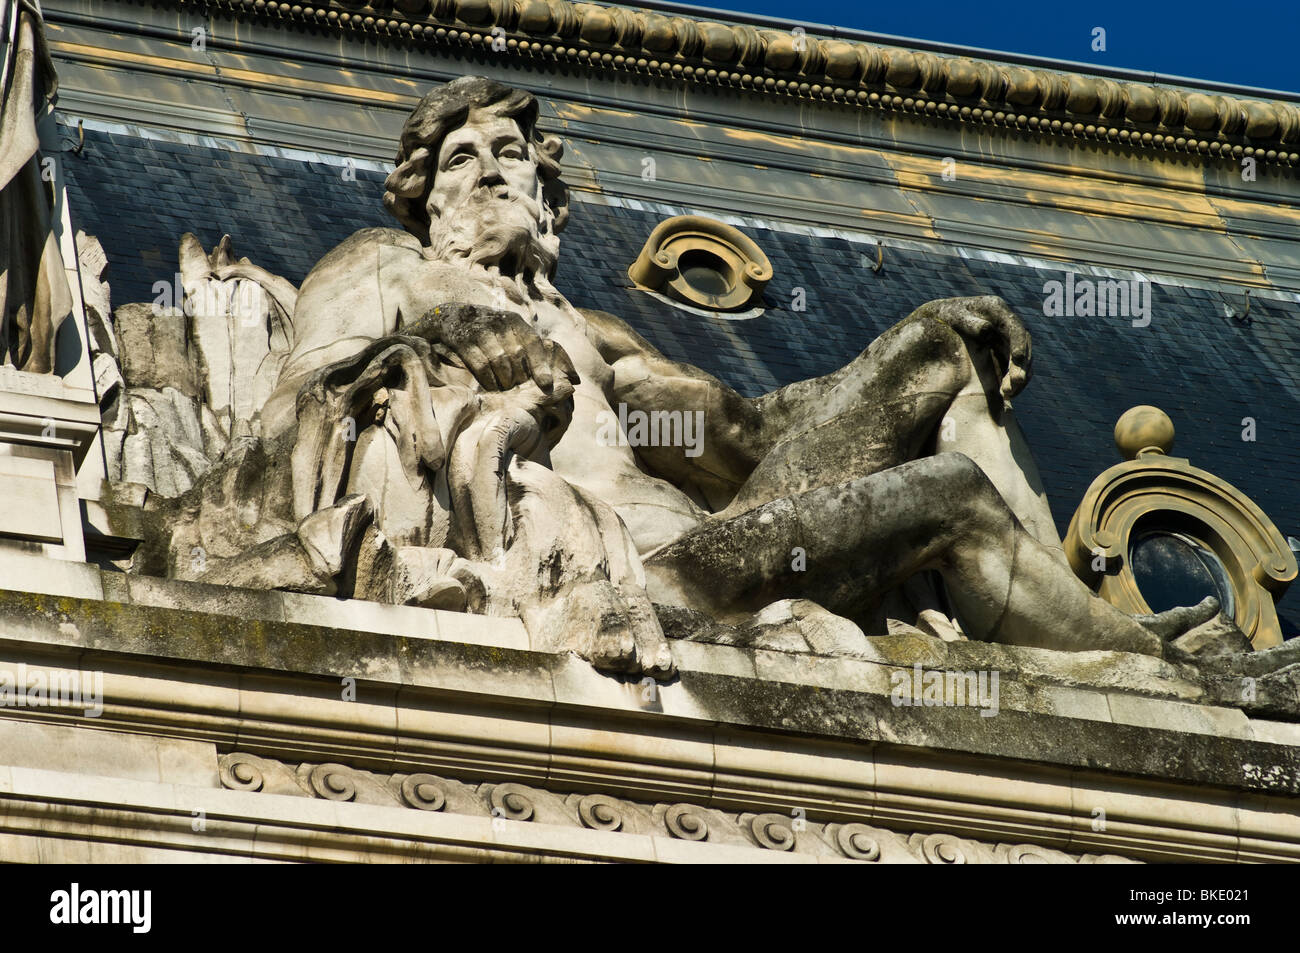 Statue on roof of town hall in Tours, France Stock Photo